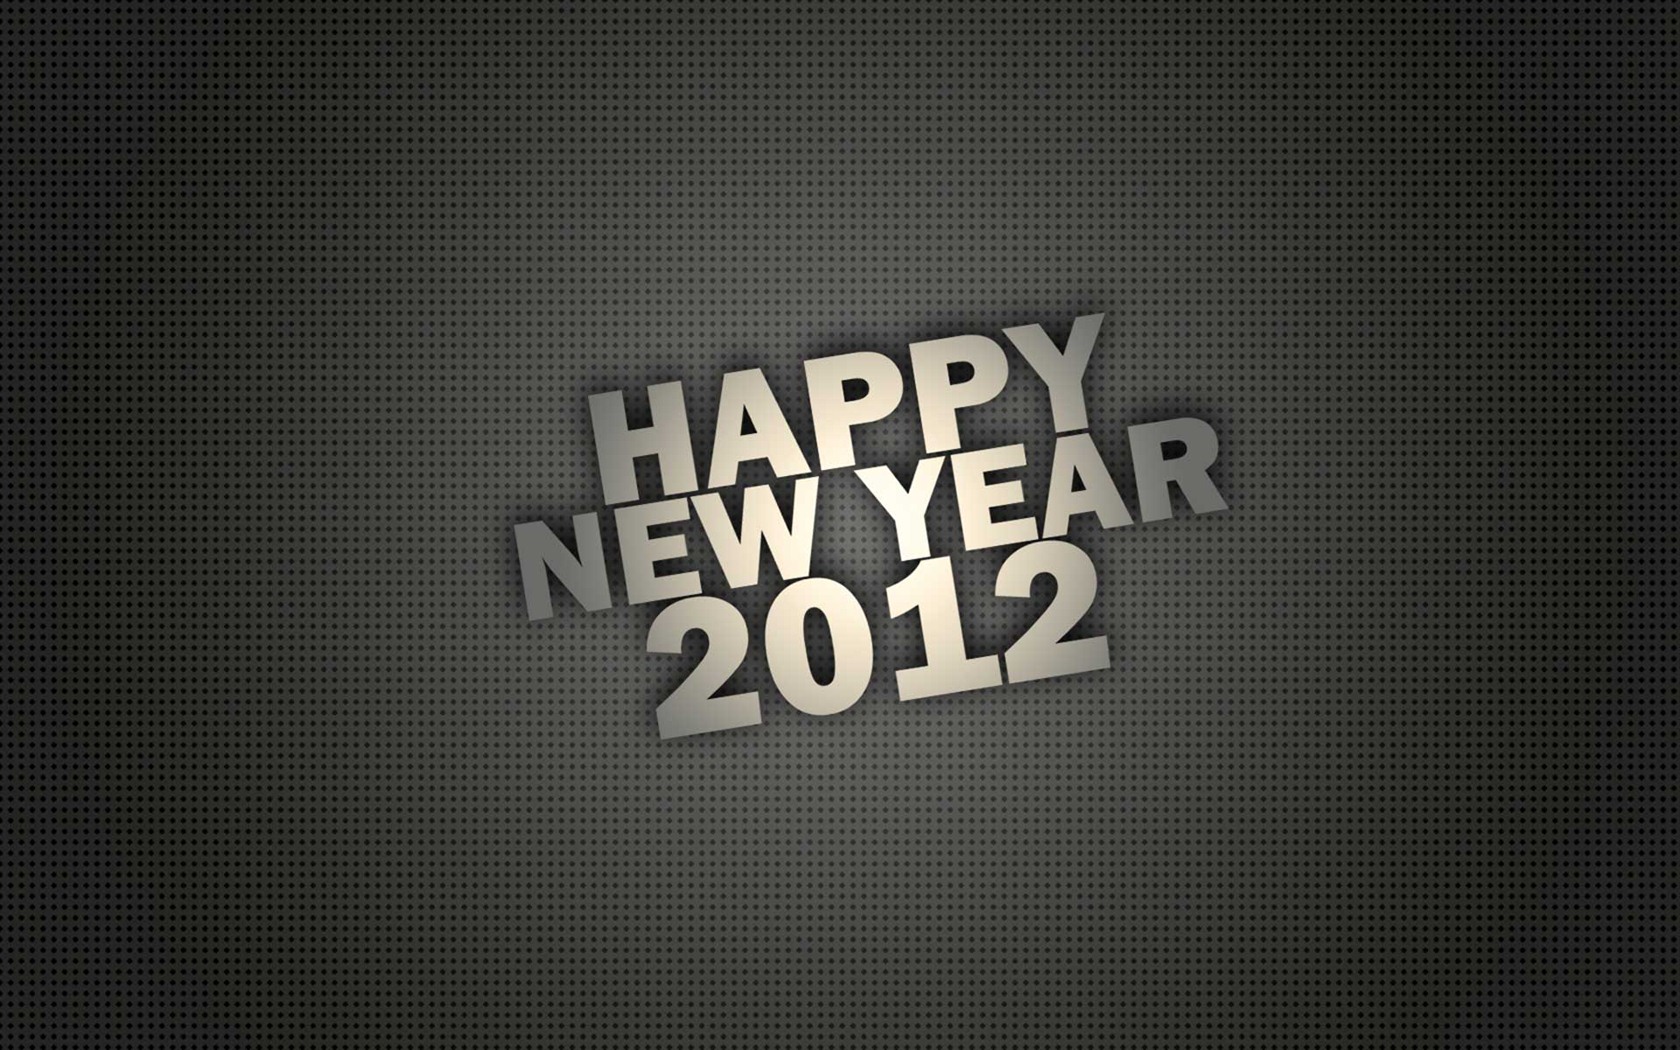 2012 New Year wallpapers (2) #4 - 1680x1050